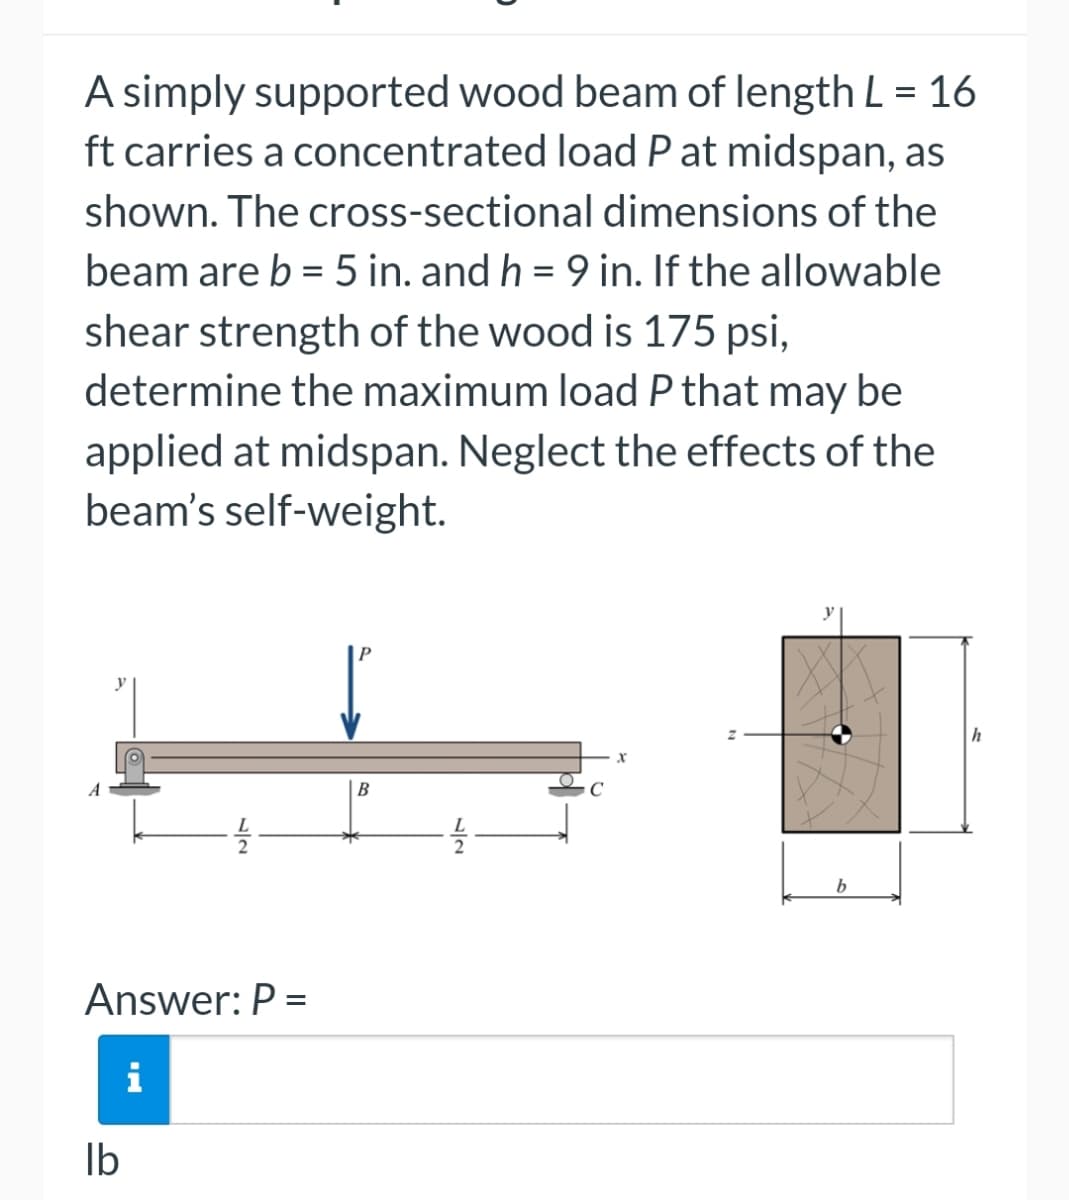 A simply supported wood beam of length L = 16
ft carries a concentrated load P at midspan, as
shown. The cross-sectional dimensions of the
beam are b = 5 in. and h = 9 in. If the allowable
shear strength of the wood is 175 psi,
determine the maximum load P that may be
applied at midspan. Neglect the effects of the
beam's self-weight.
Answer: P =
lb
IN
B
X
b